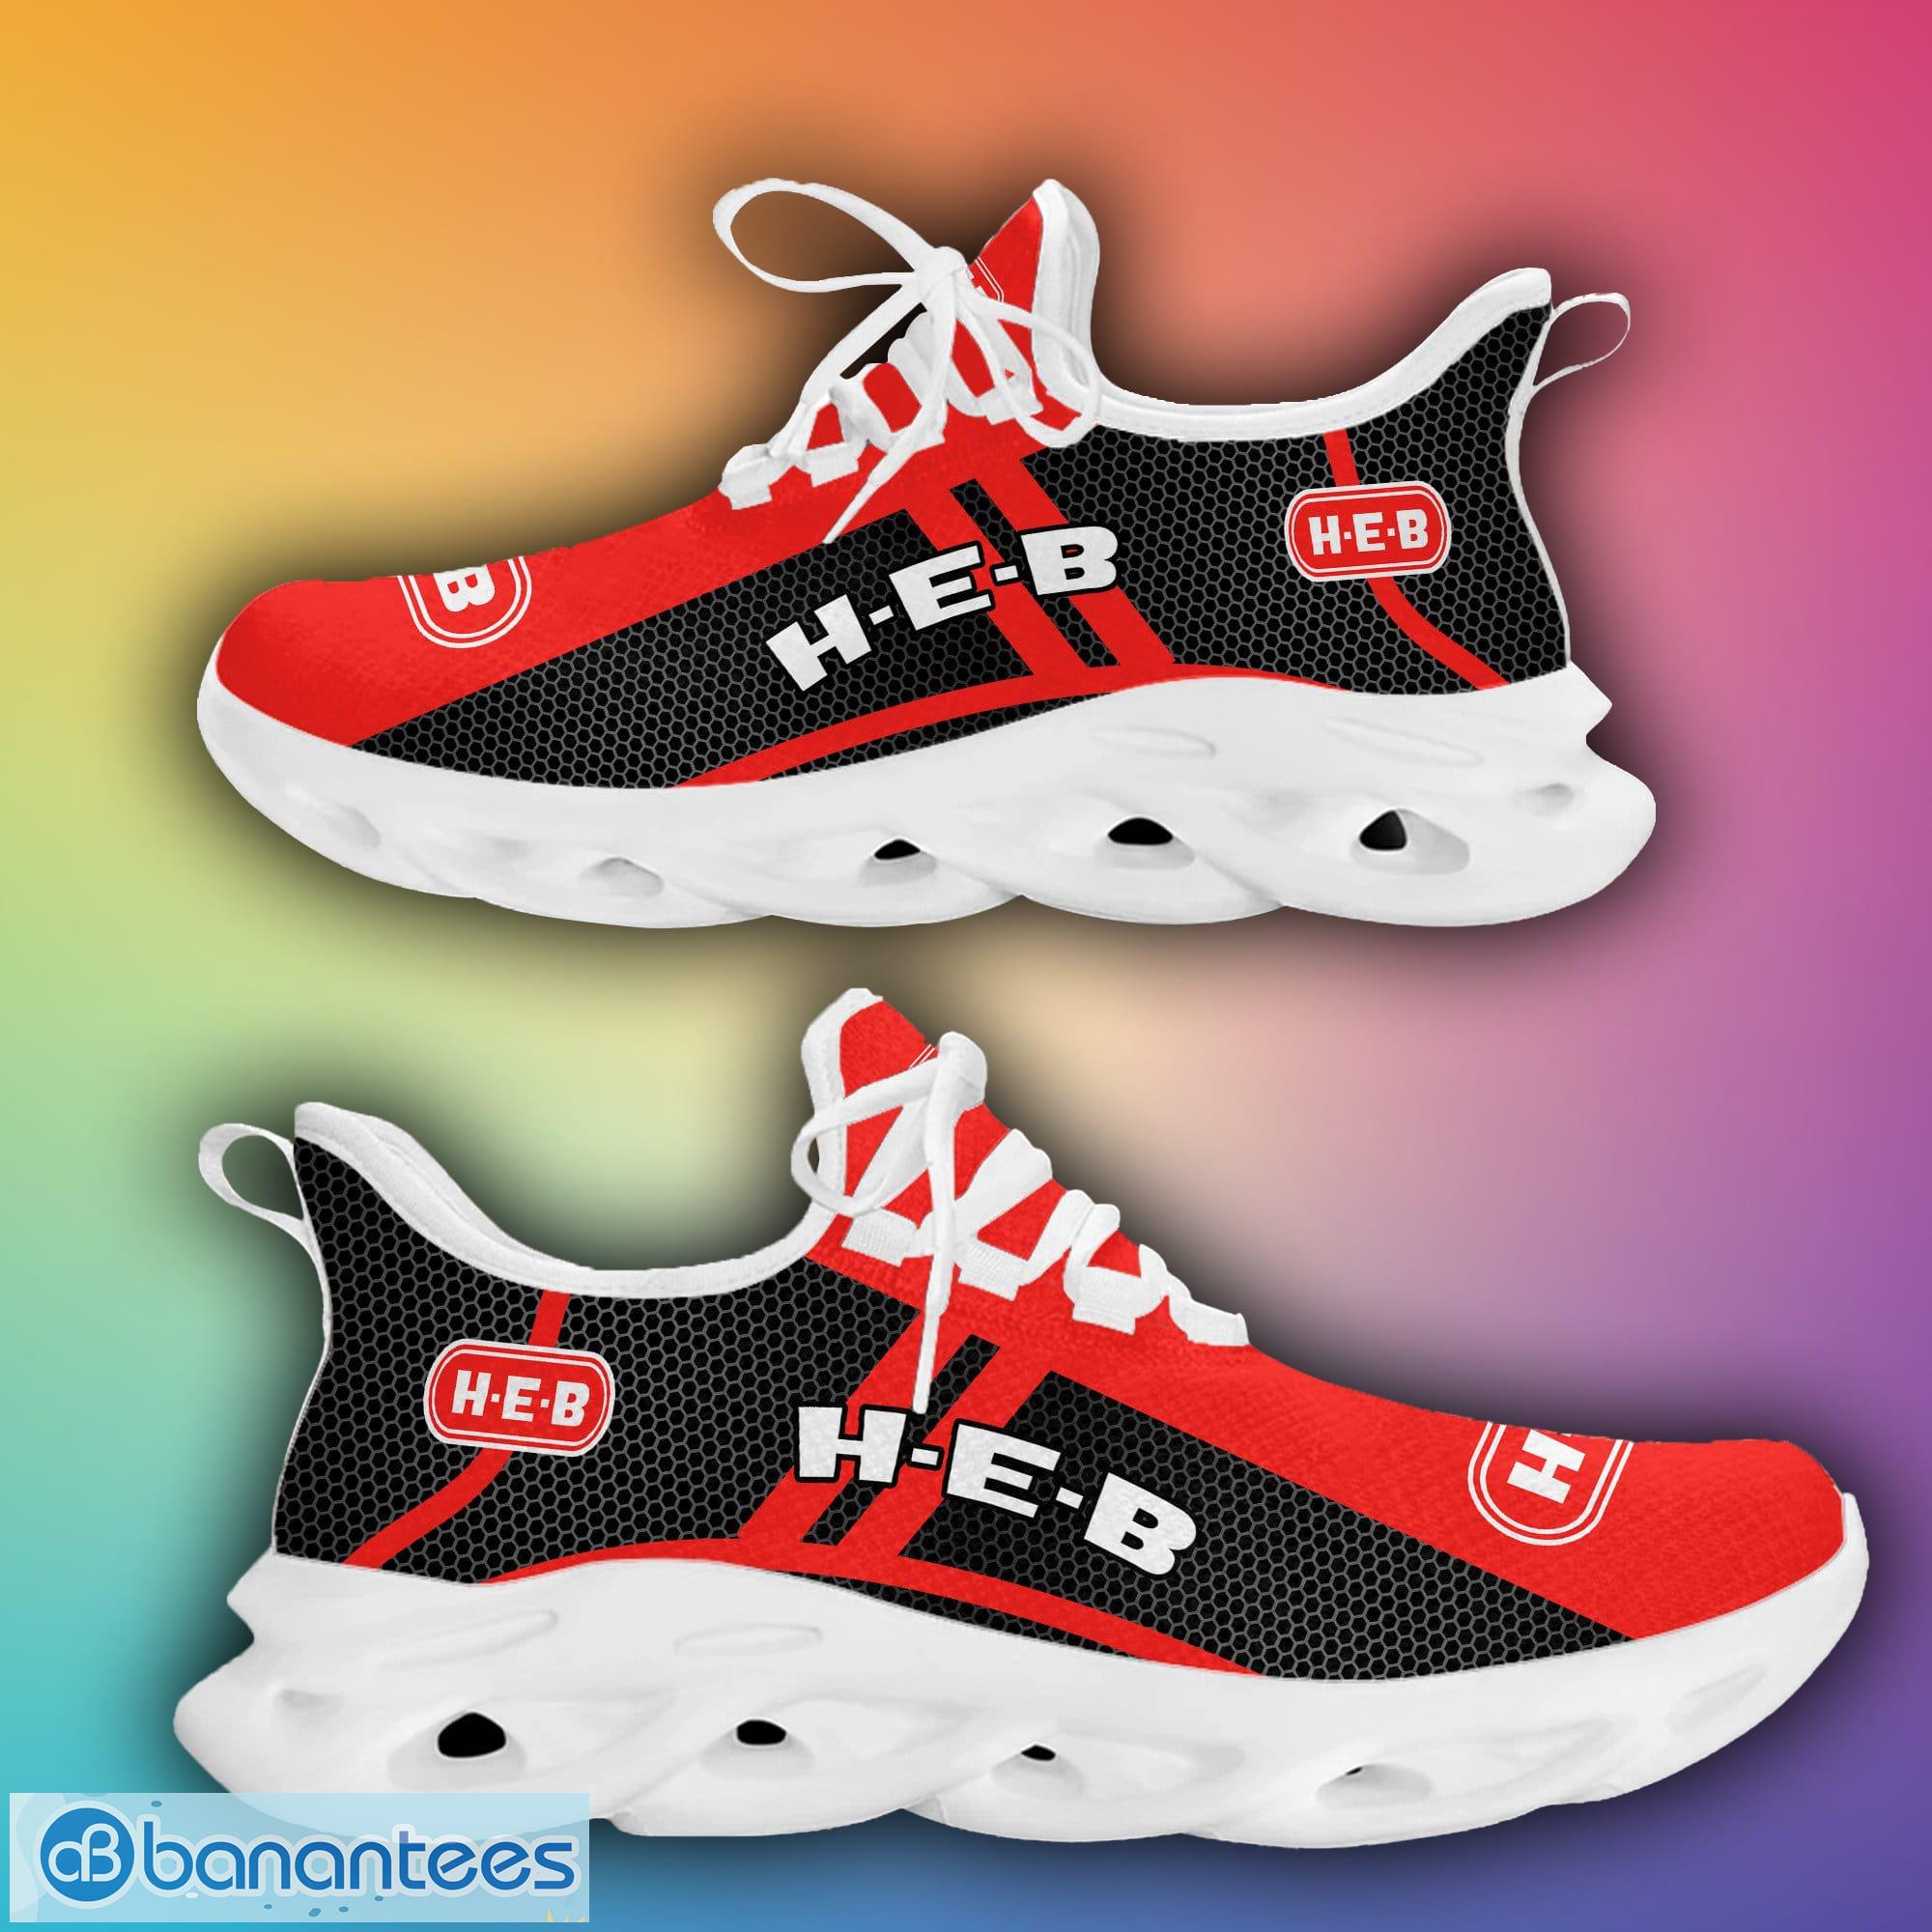 Excel tempo konto h-e-b Logo Running Sneakers Symbolic Max Soul Shoes Gift For Men Women -  Banantees